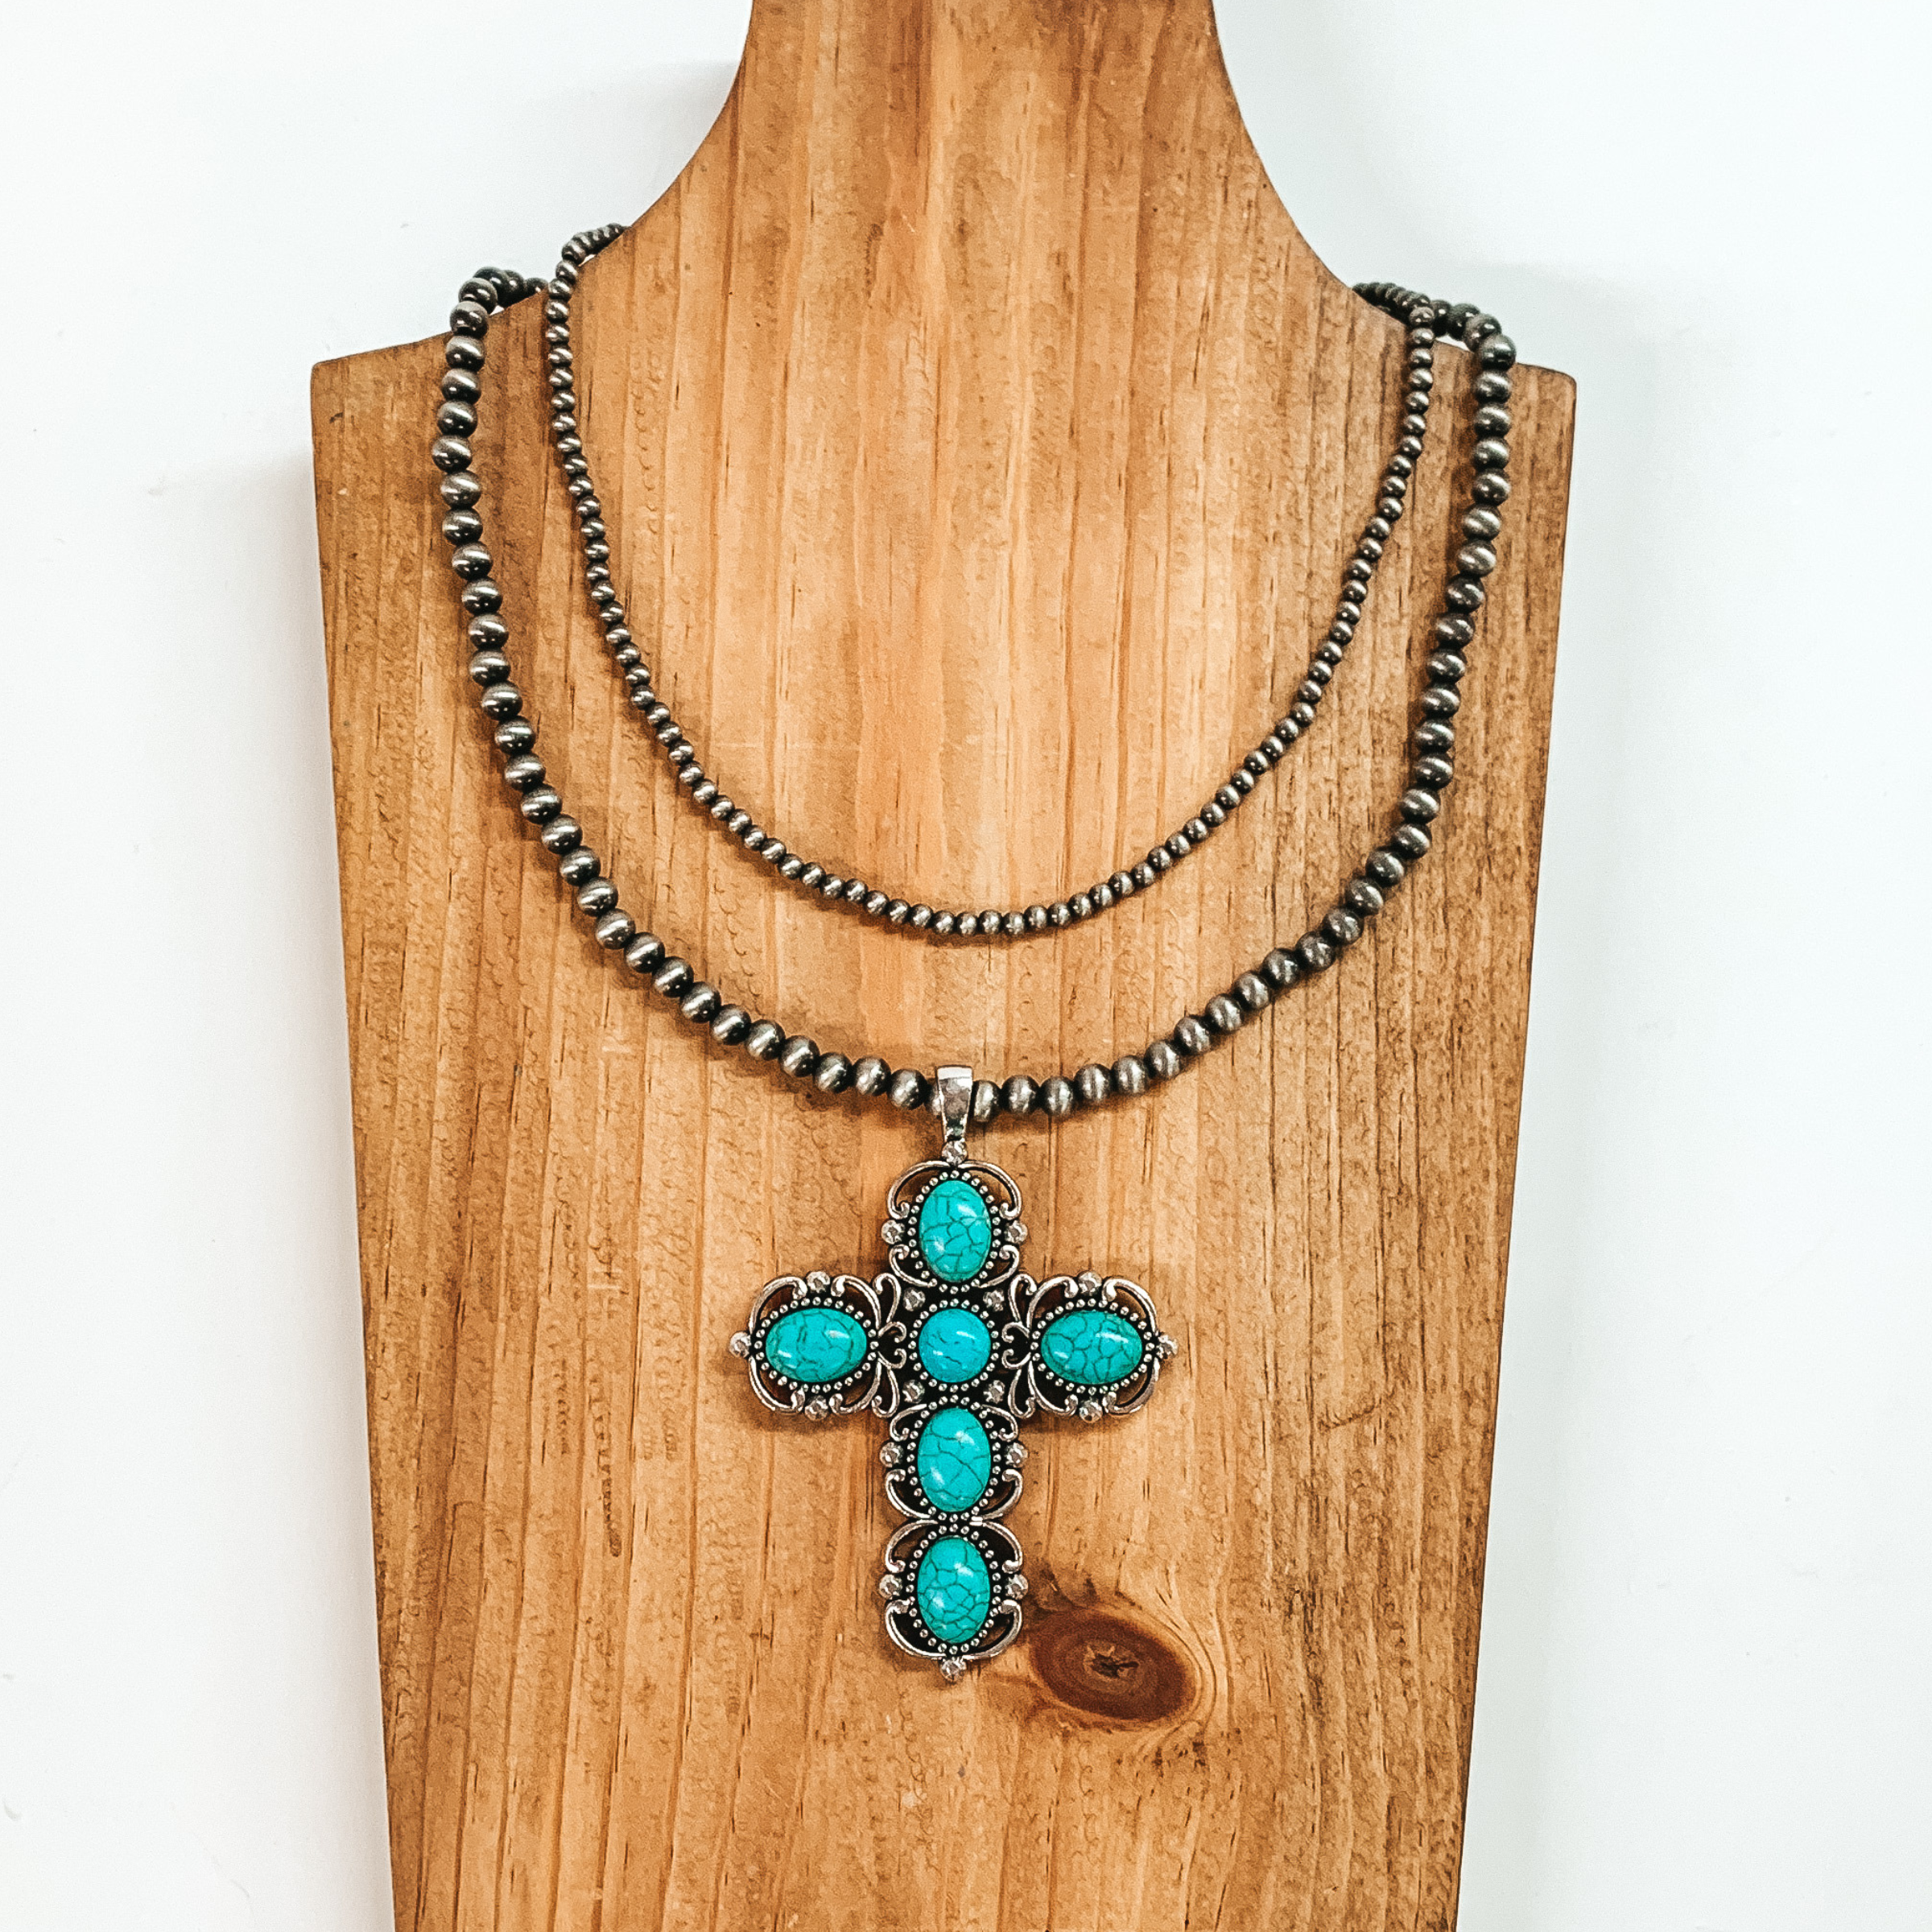 Two strand neckace with different sized silver beaded strands of different lengths with a cross pendant that has turquoise stones. This necklace is pictured on a wooden necklace holder on a white background. 